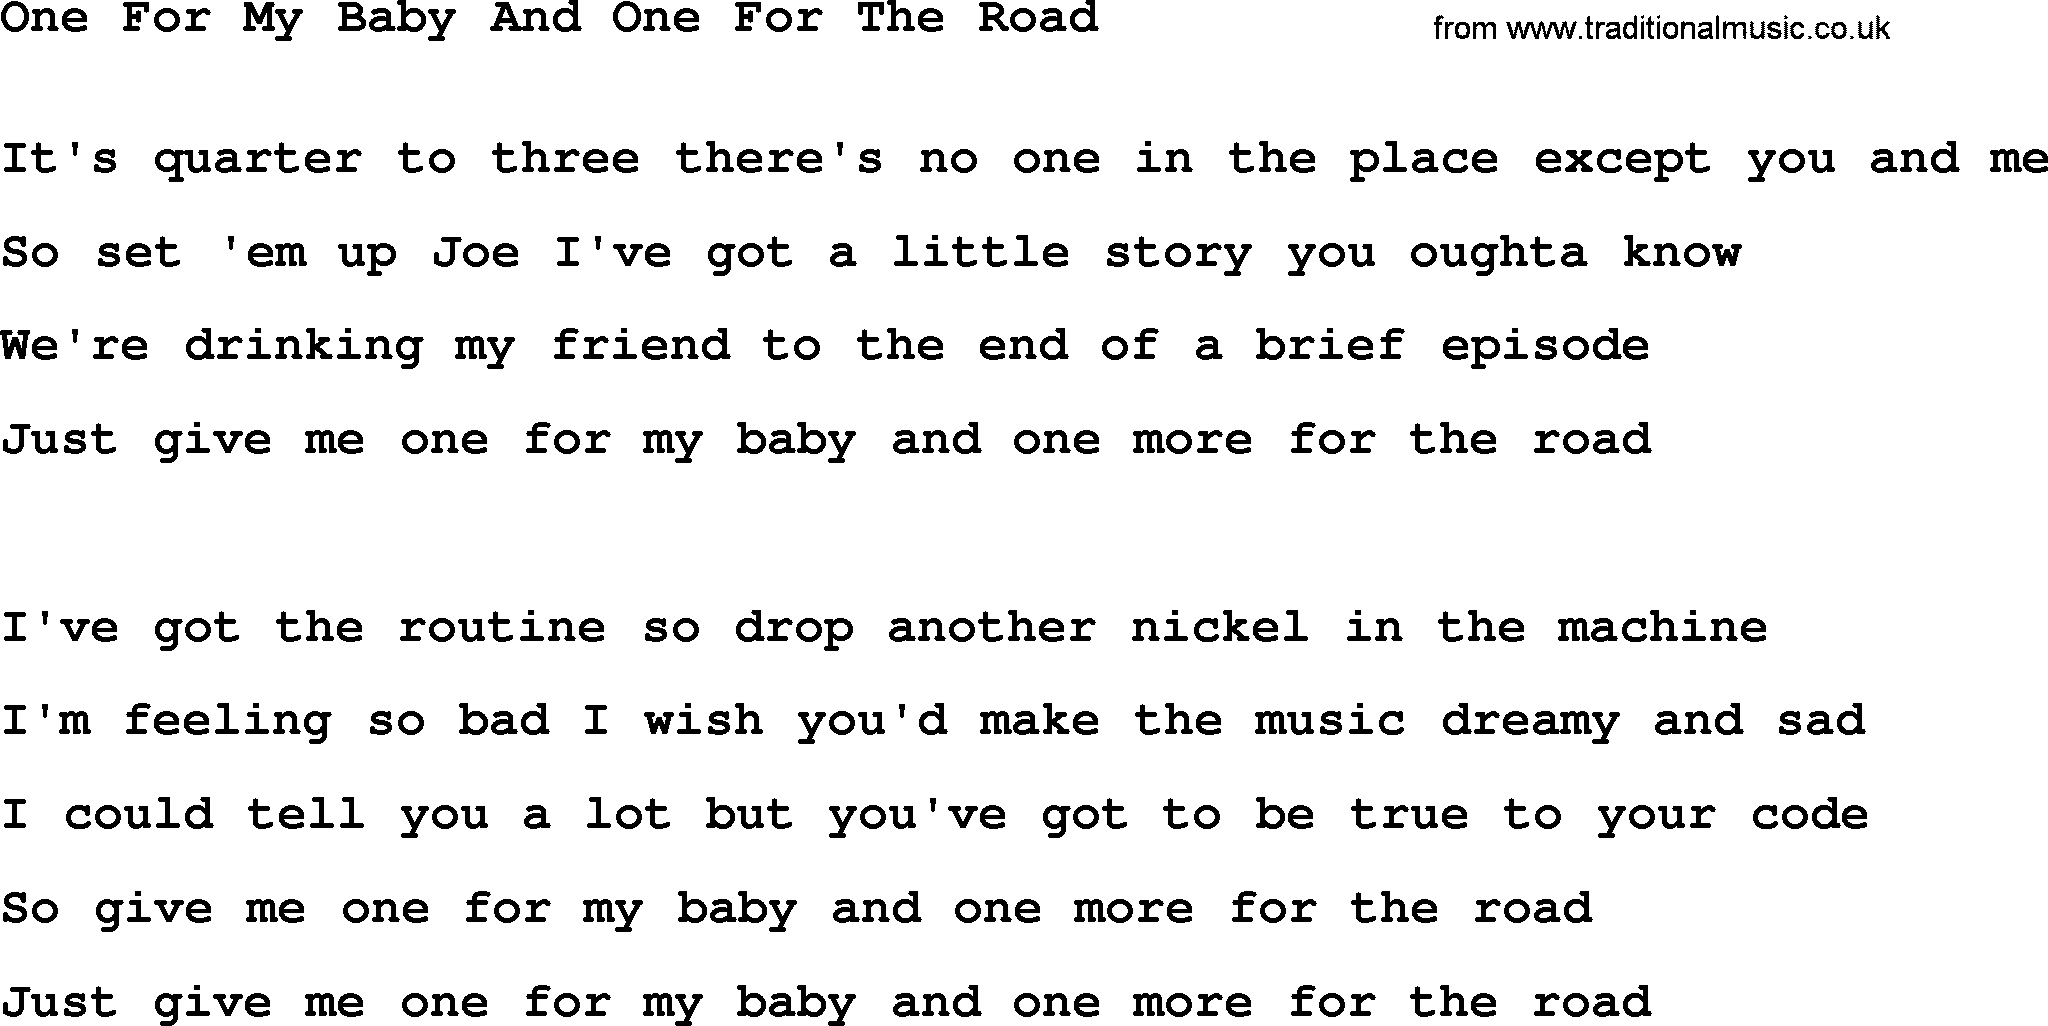 Willie Nelson song: One For My Baby And One For The Road lyrics